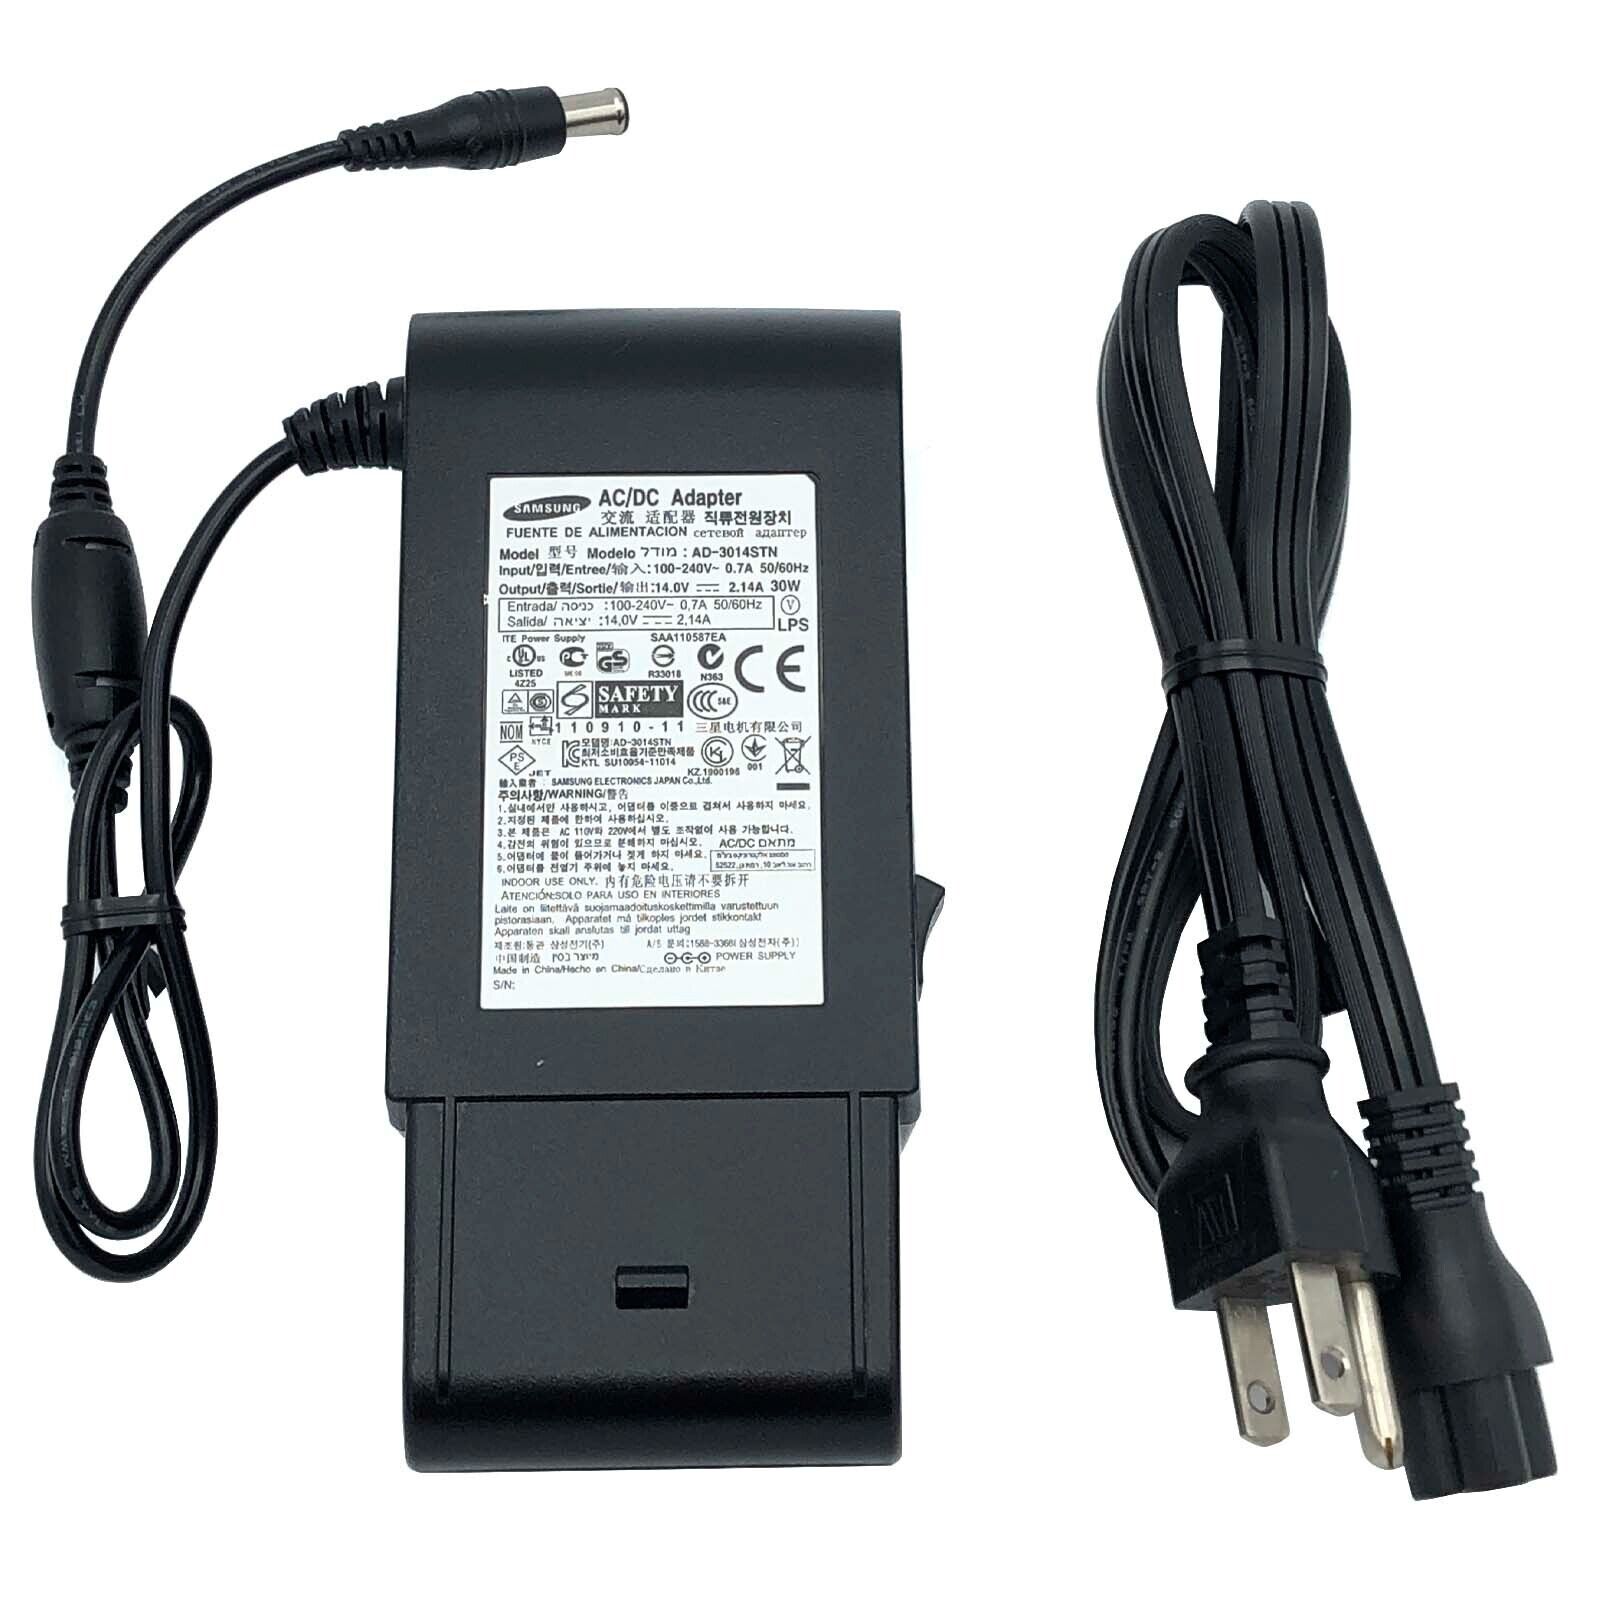 Genuine Samsung Power Adapter for SyncMaster S27A350H S27B550V S27D590C Monitors